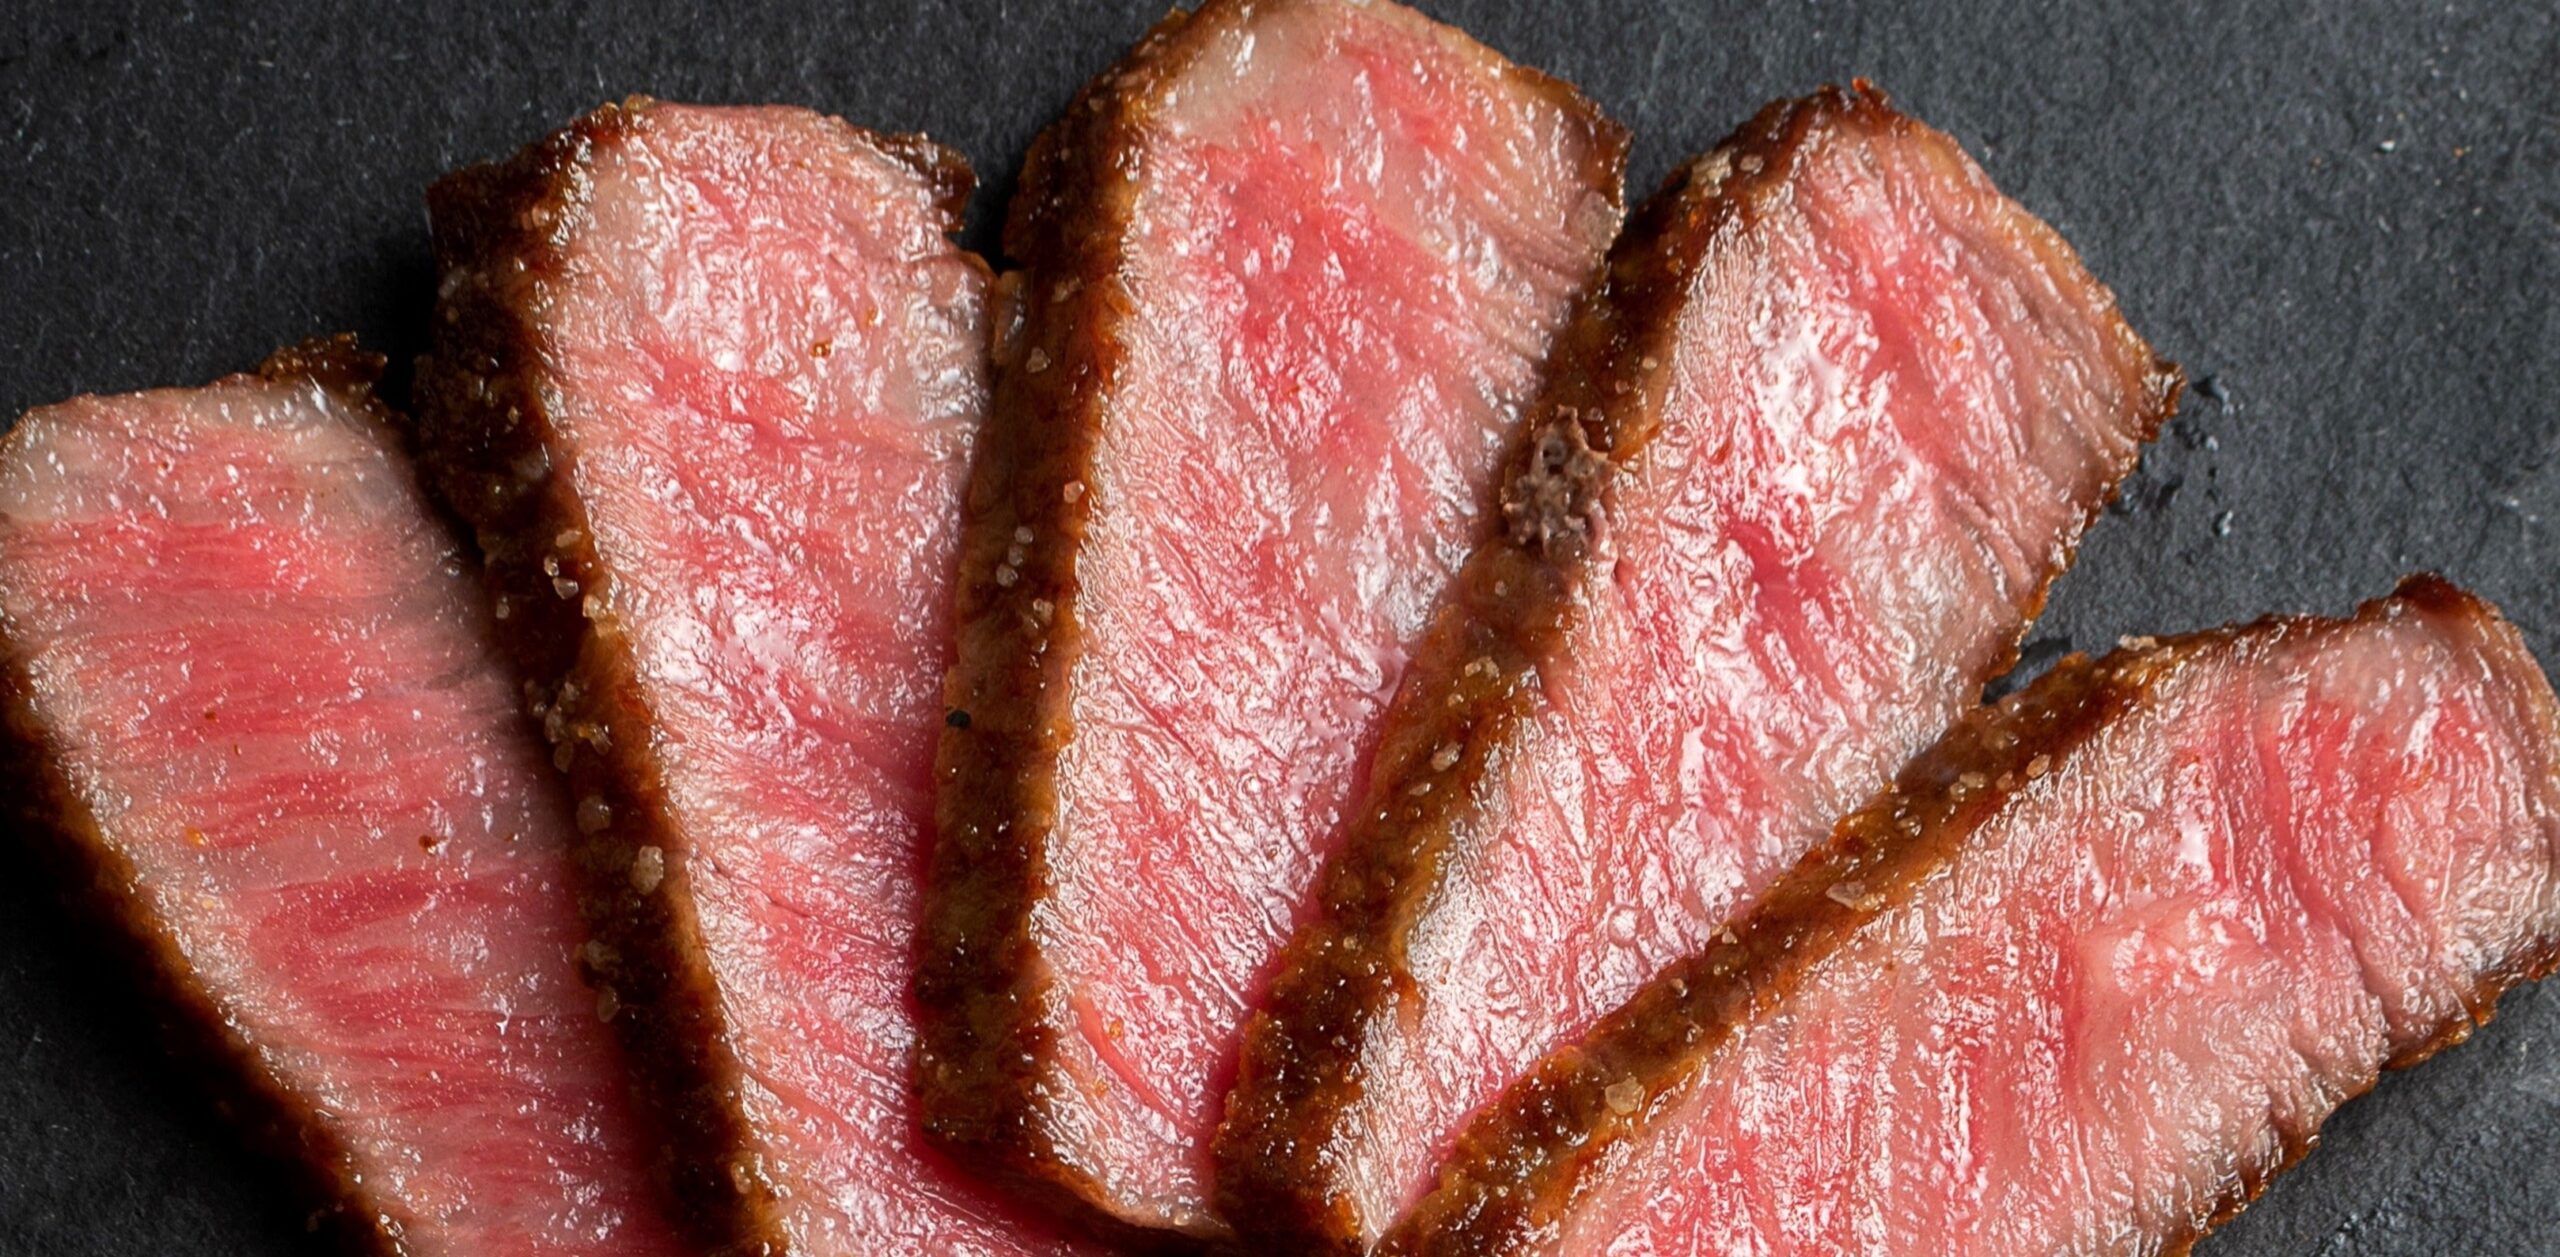 An Exquisite Delicacy: A Review of Japanese A5 Wagyu Steaks